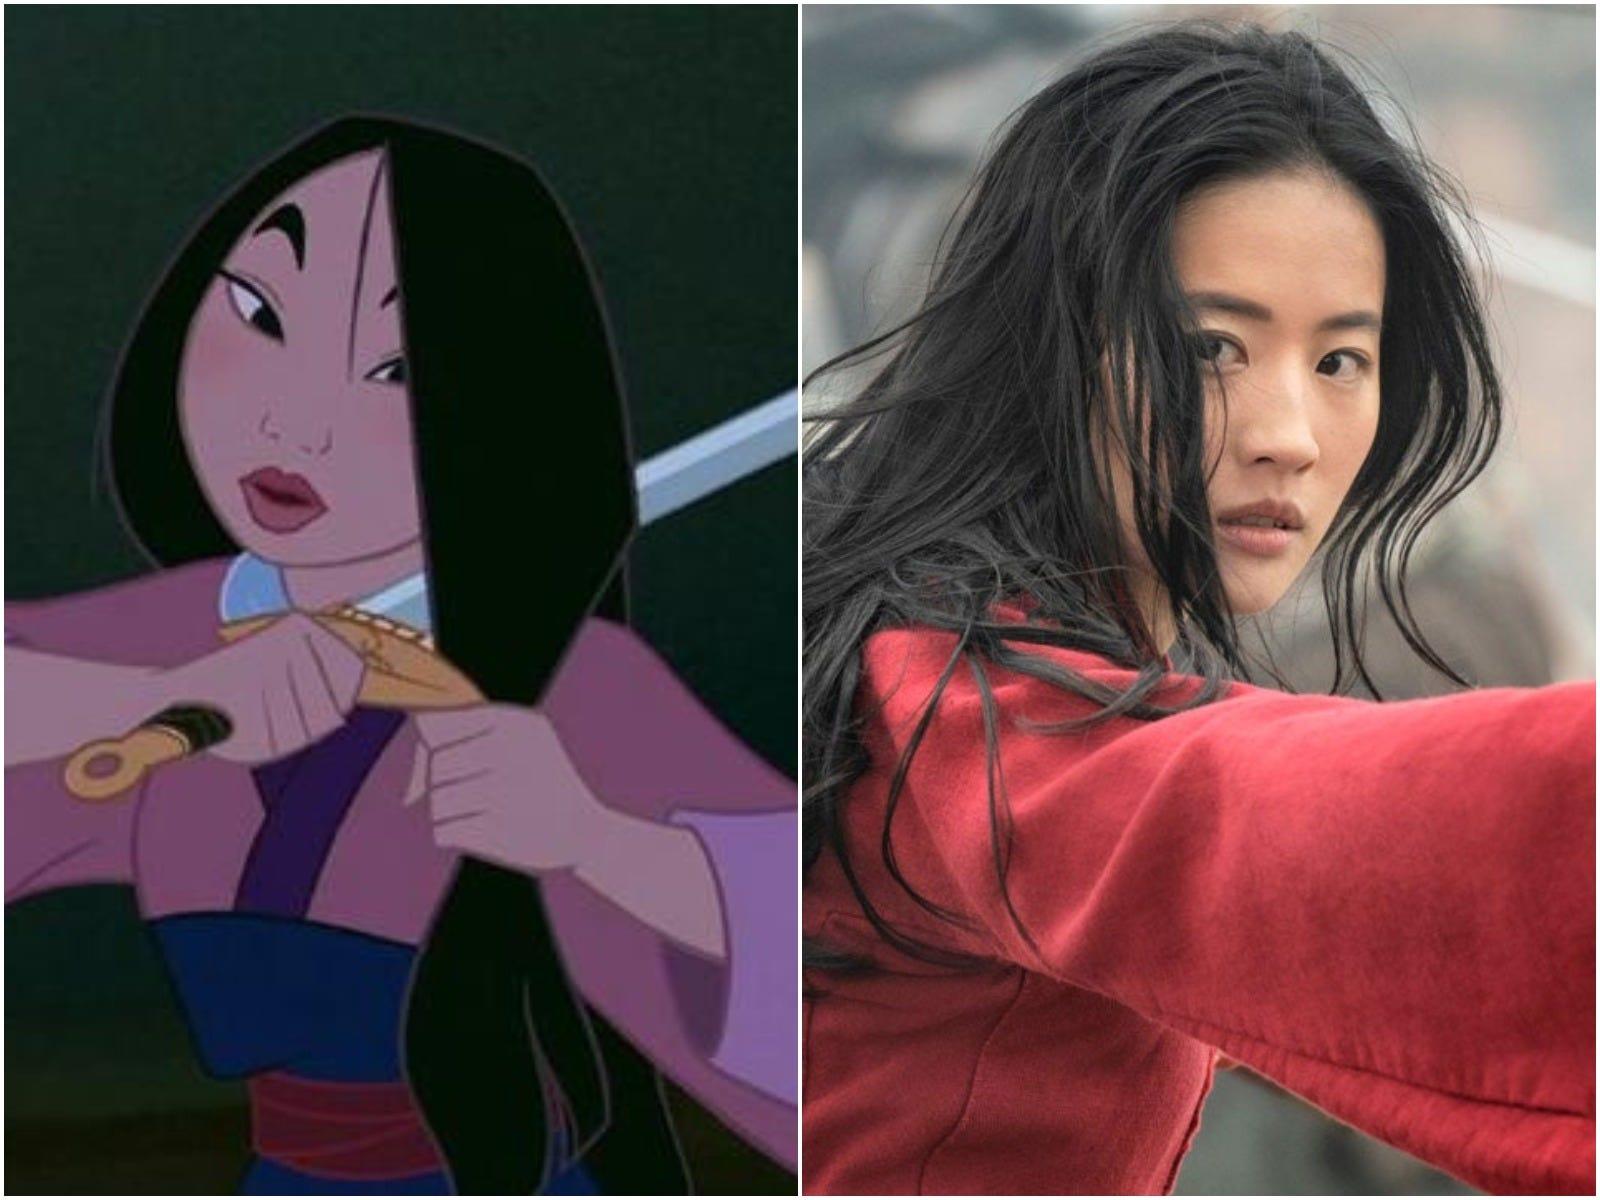 Ming-Na Wen, the actress who voiced Mulan in the 1998 animated original, pl...